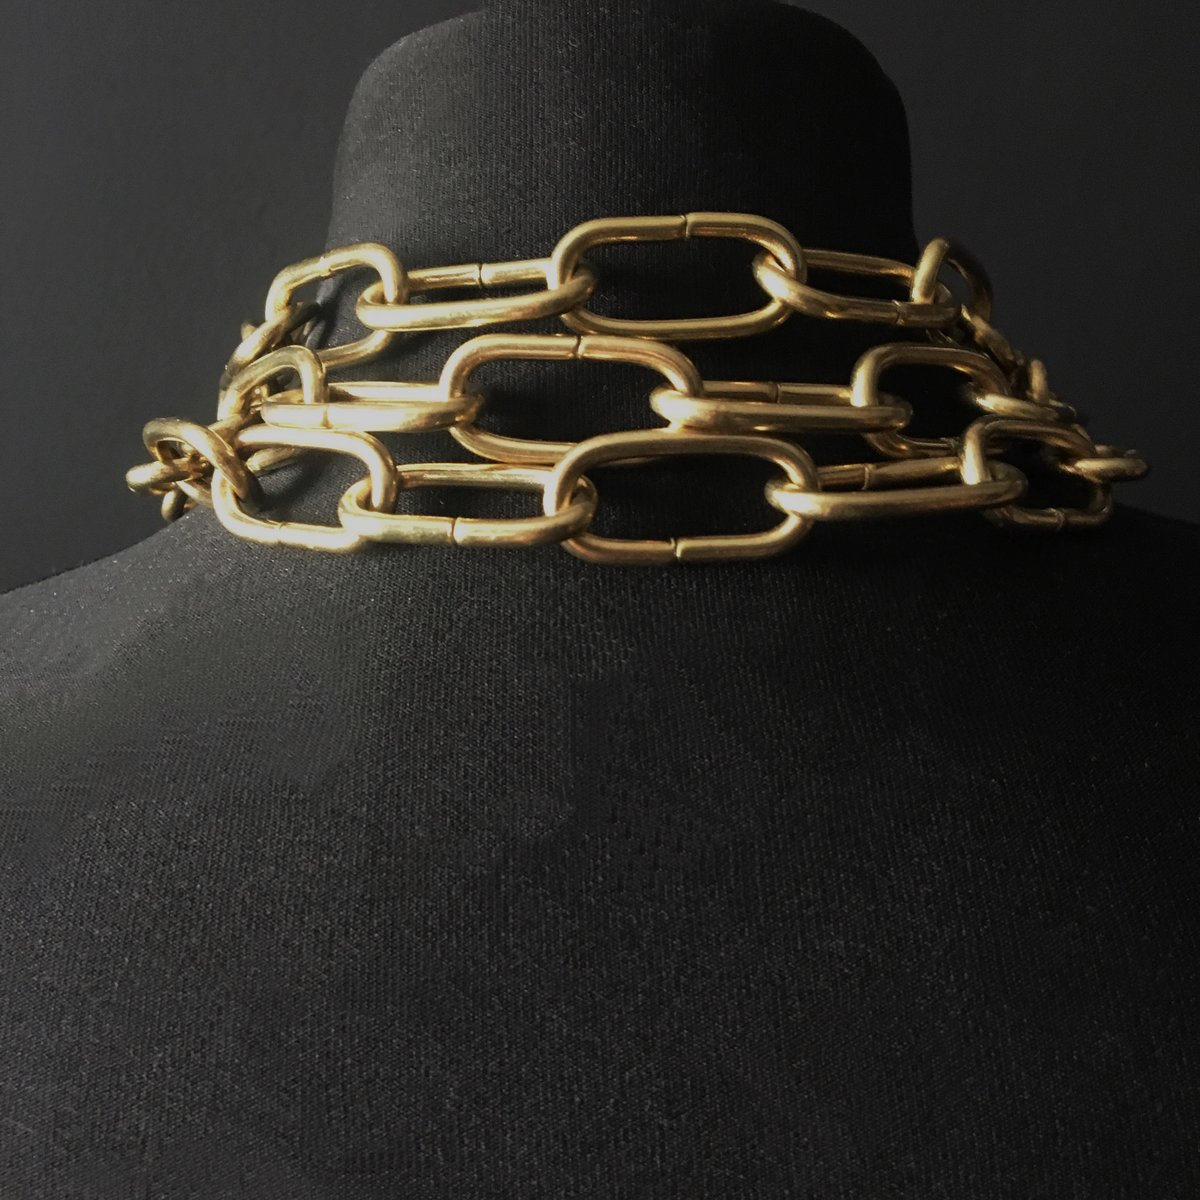 Gold triple chain ring necklace